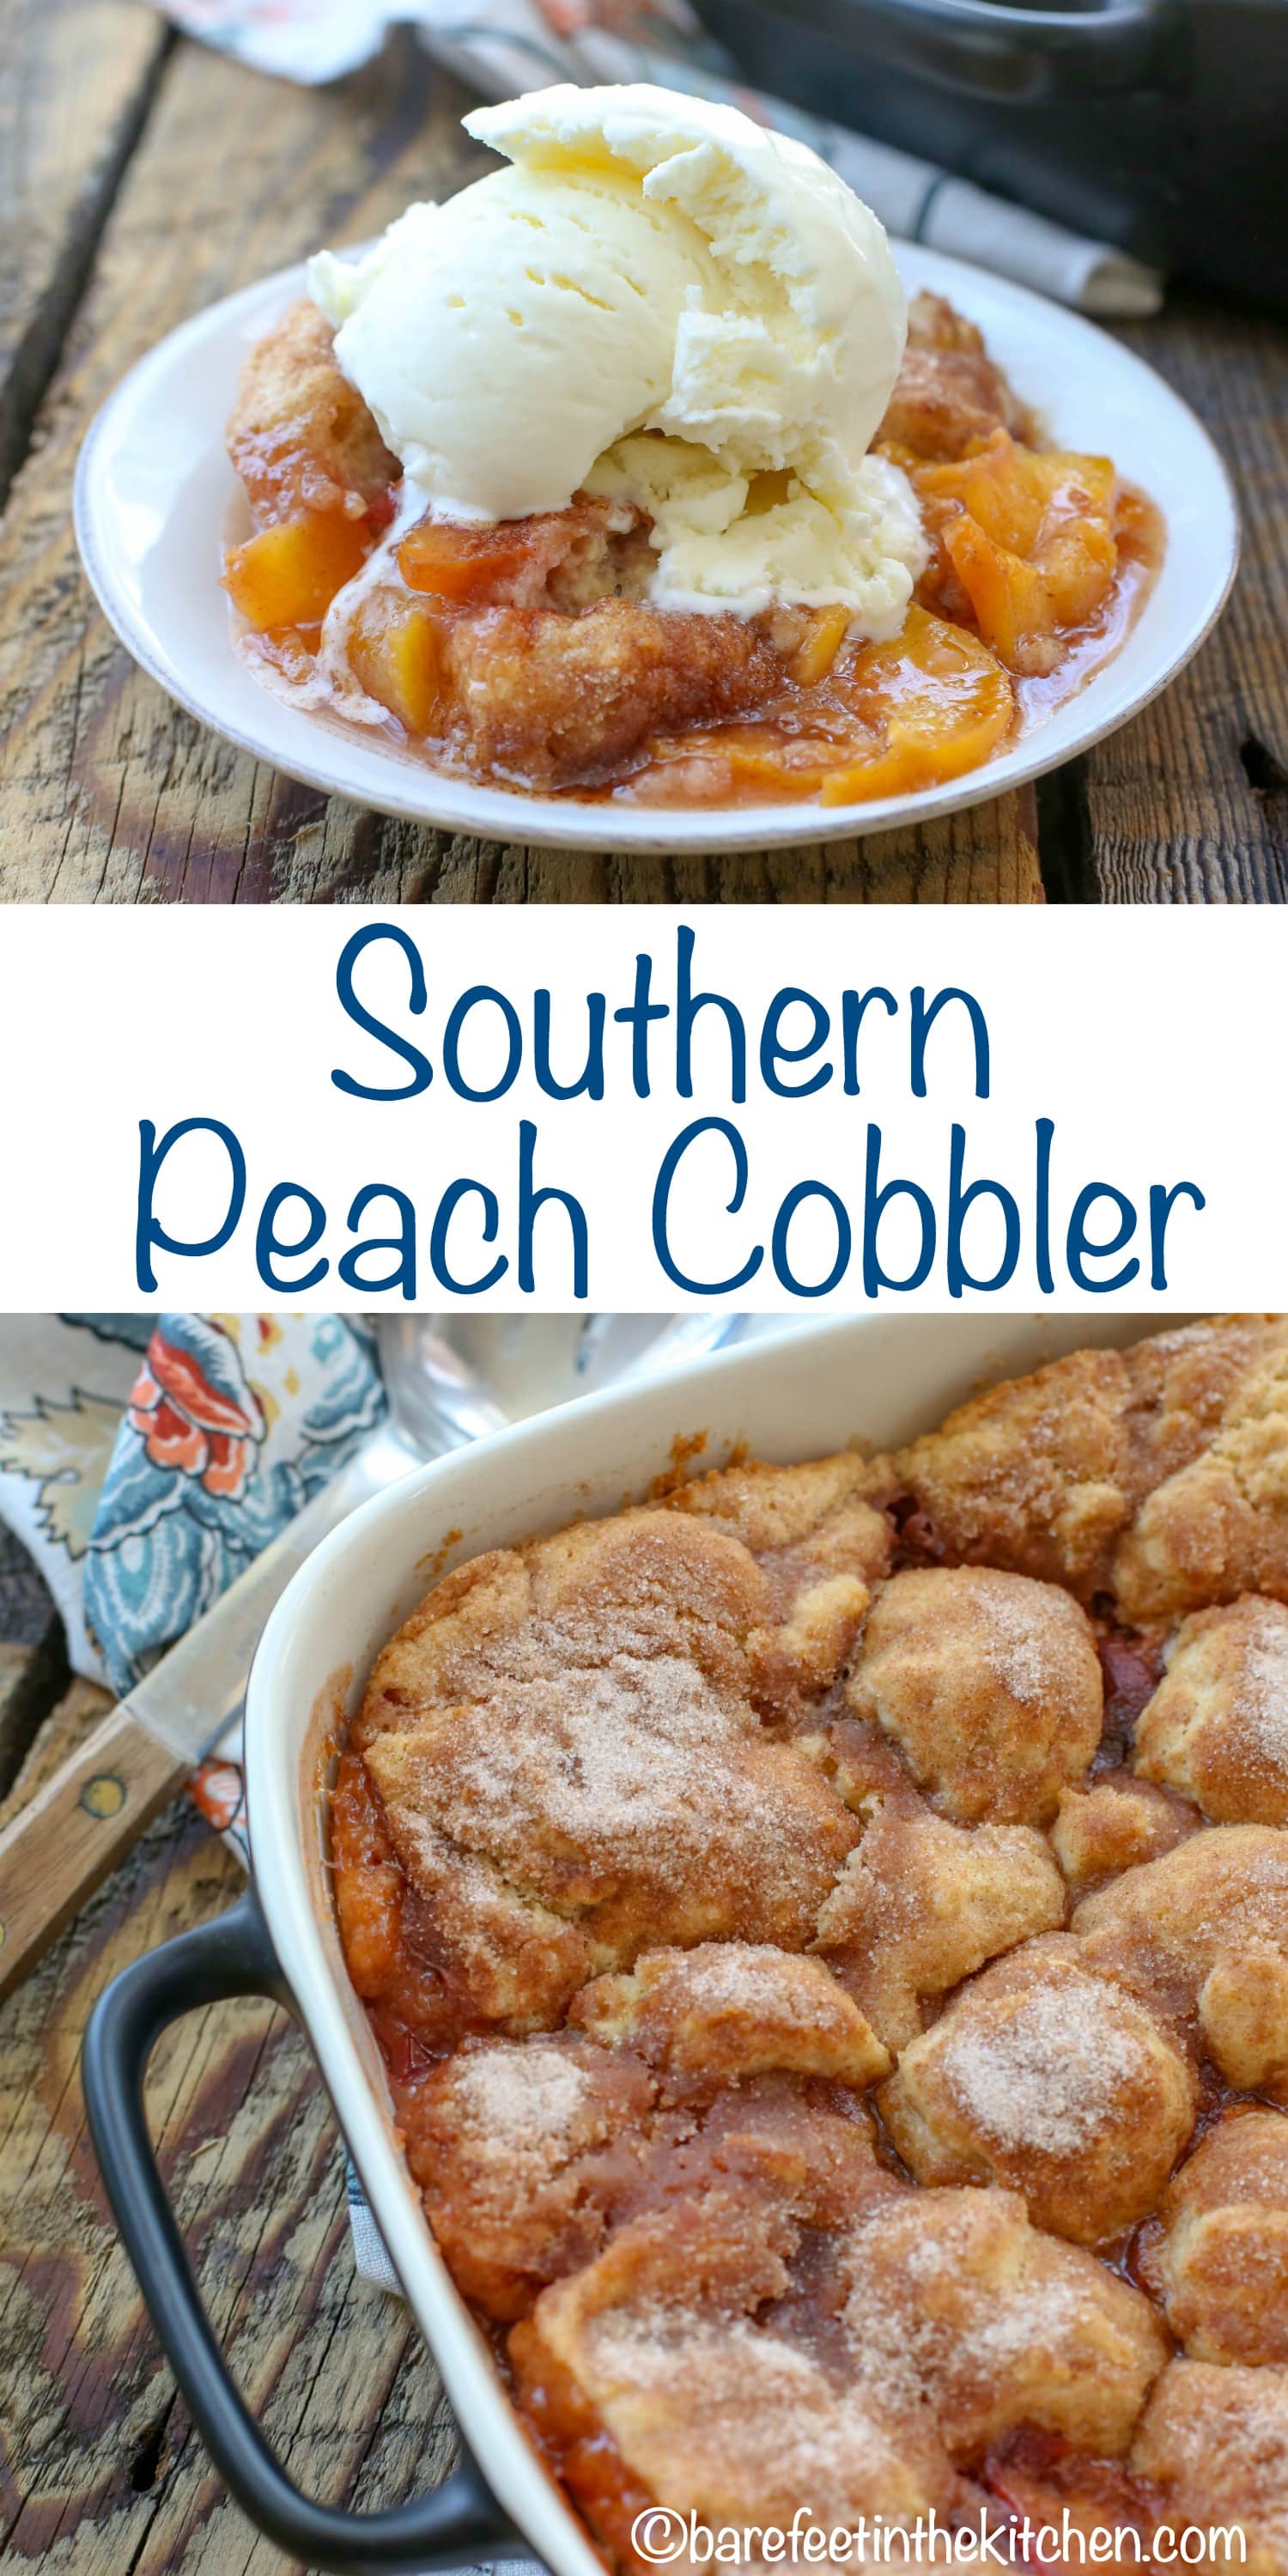 Southern Peach Cobbler - Barefeet in the Kitchen